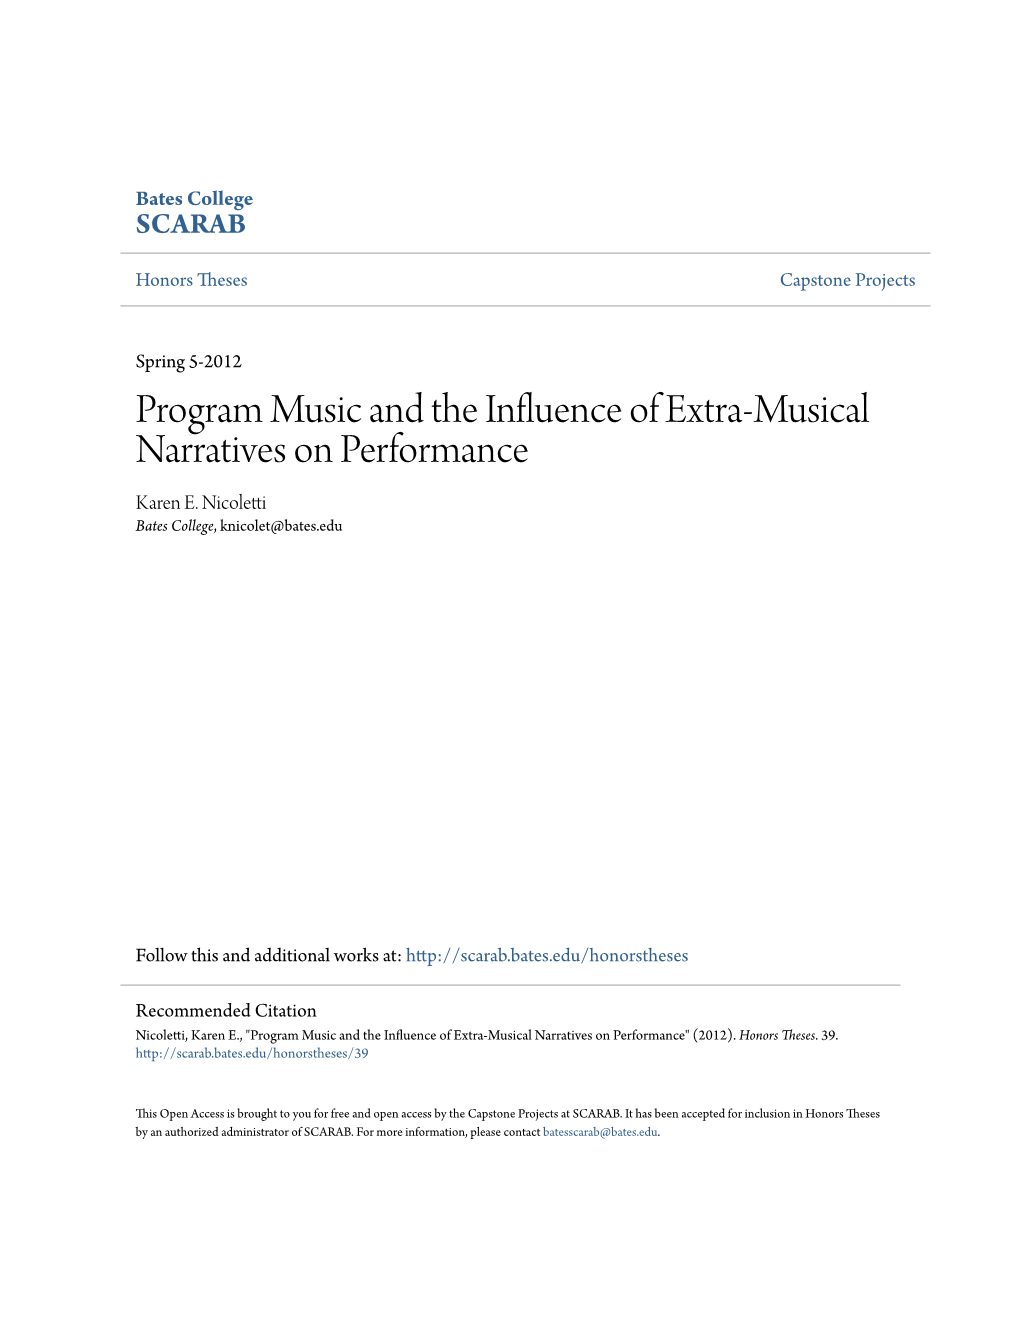 Program Music and the Influence of Extra-Musical Narratives on Performance Karen E